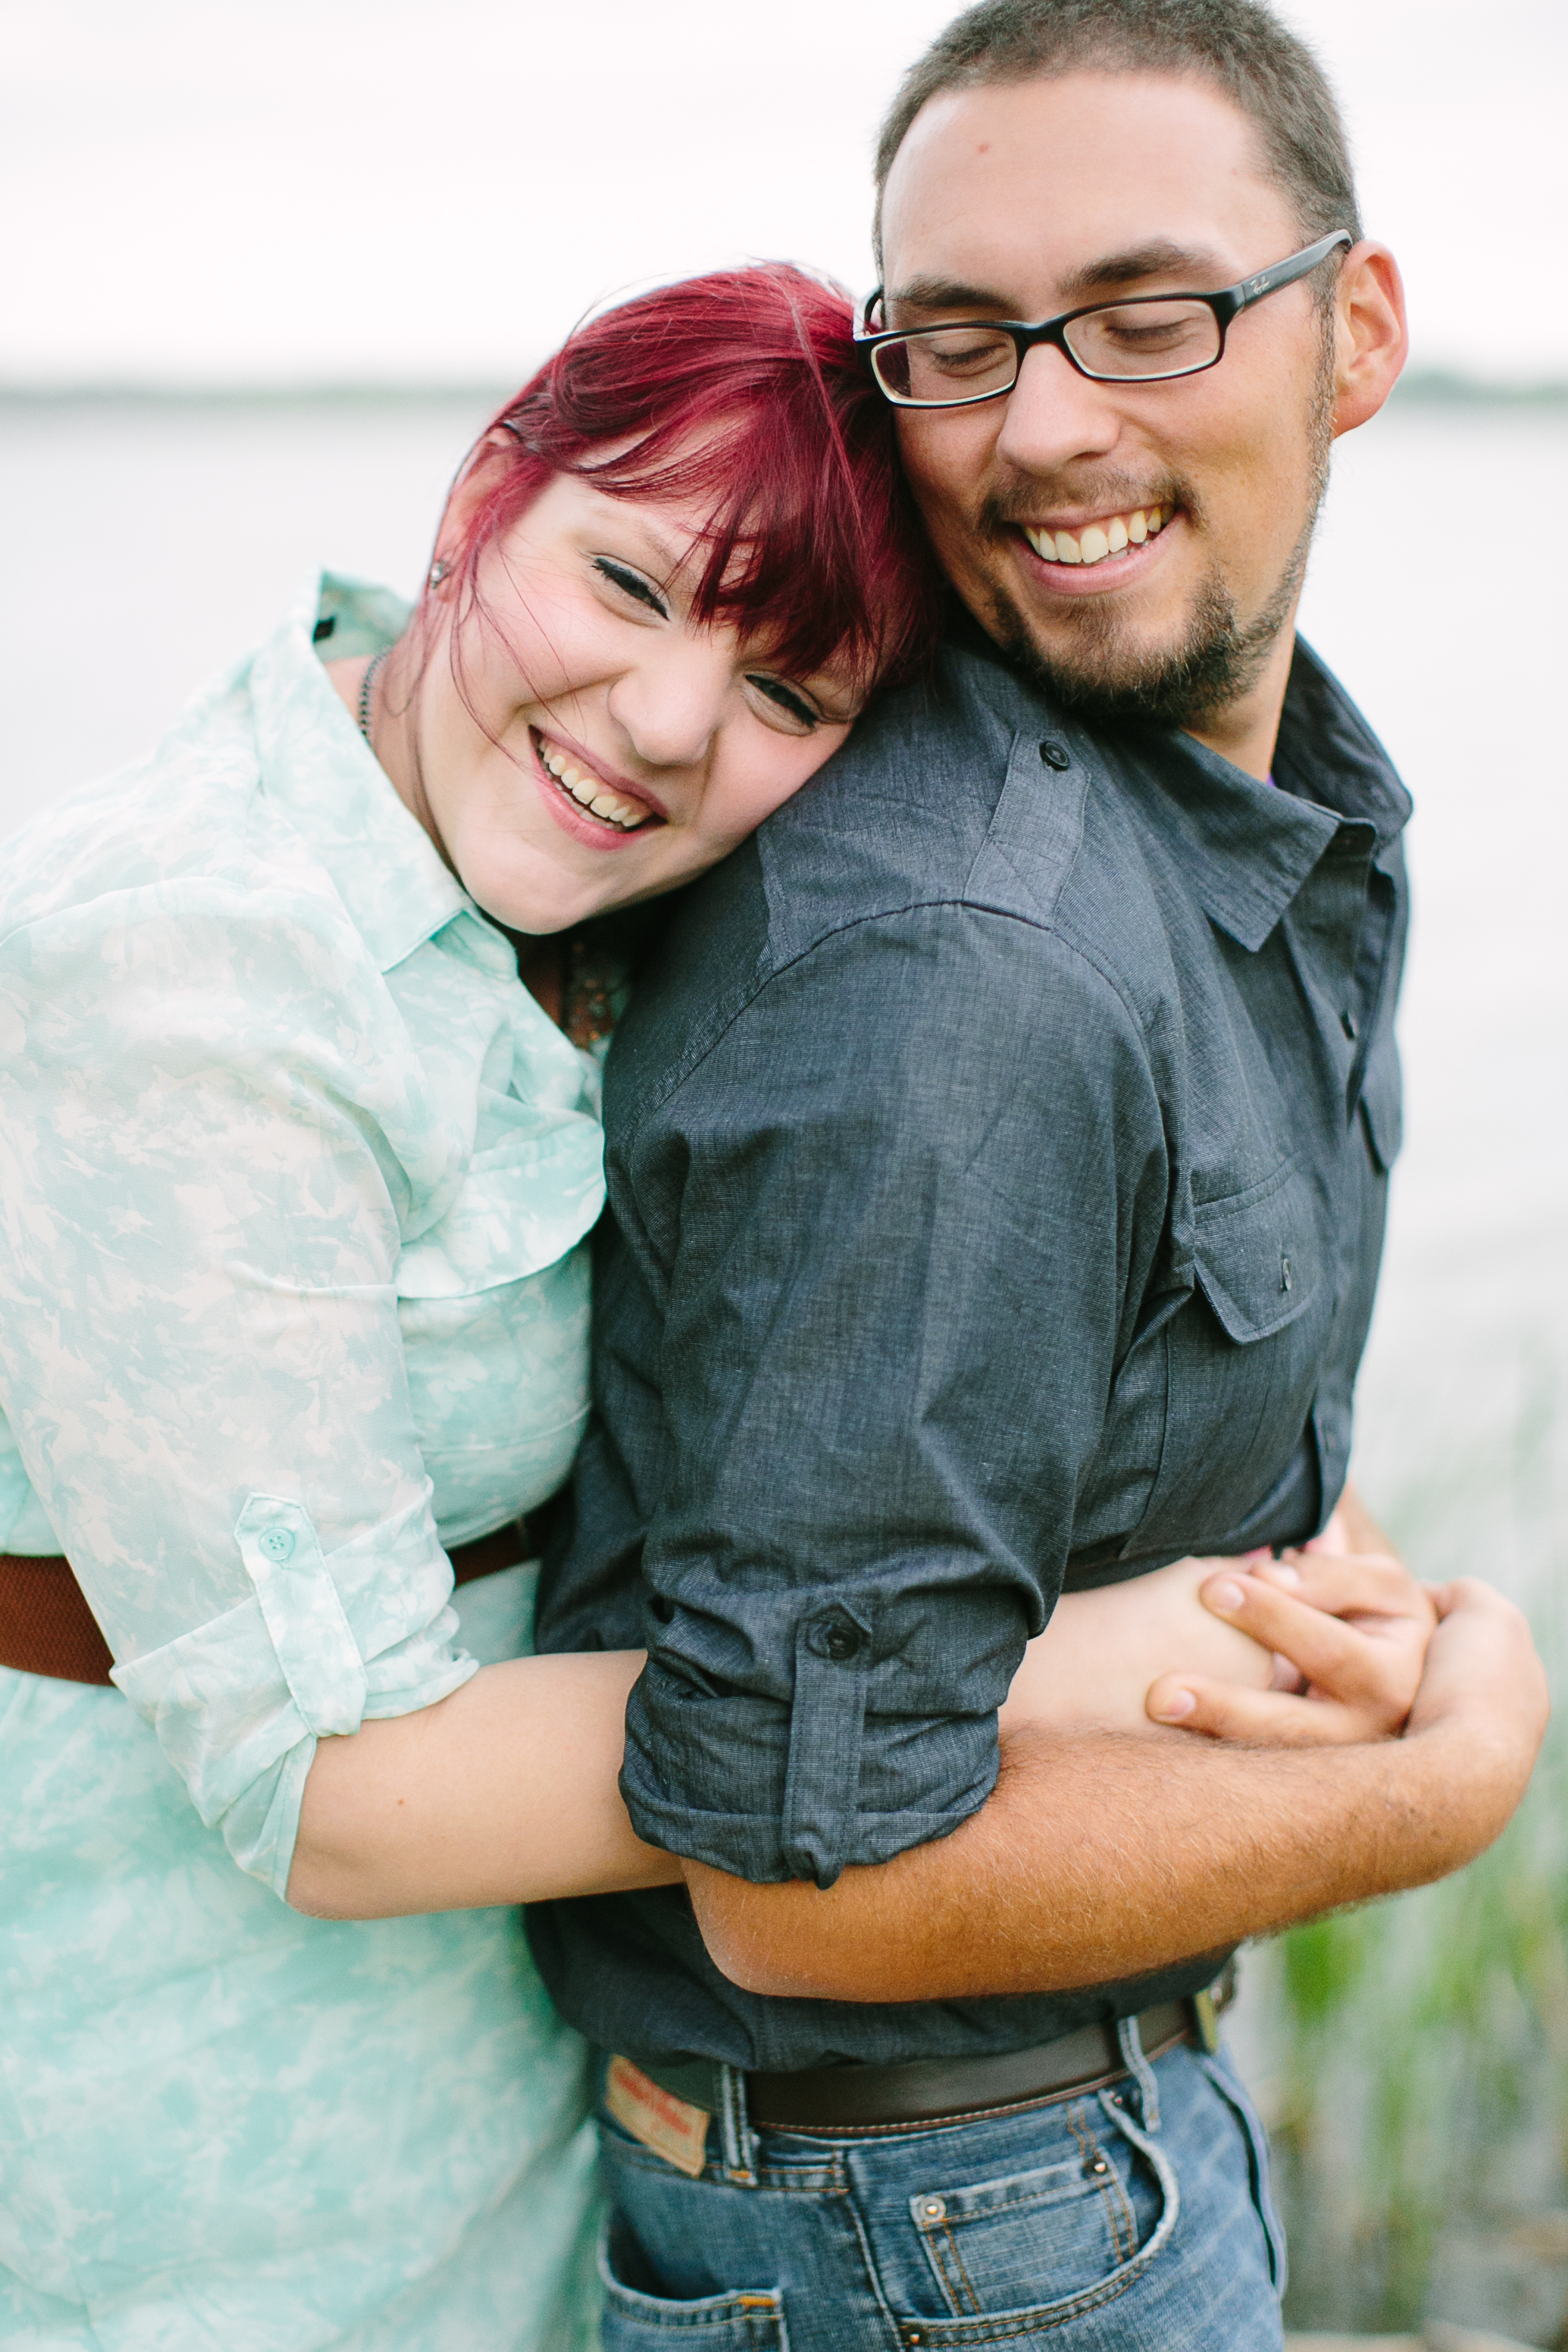 Red Headed woman in blue dress embraces a smiling man.